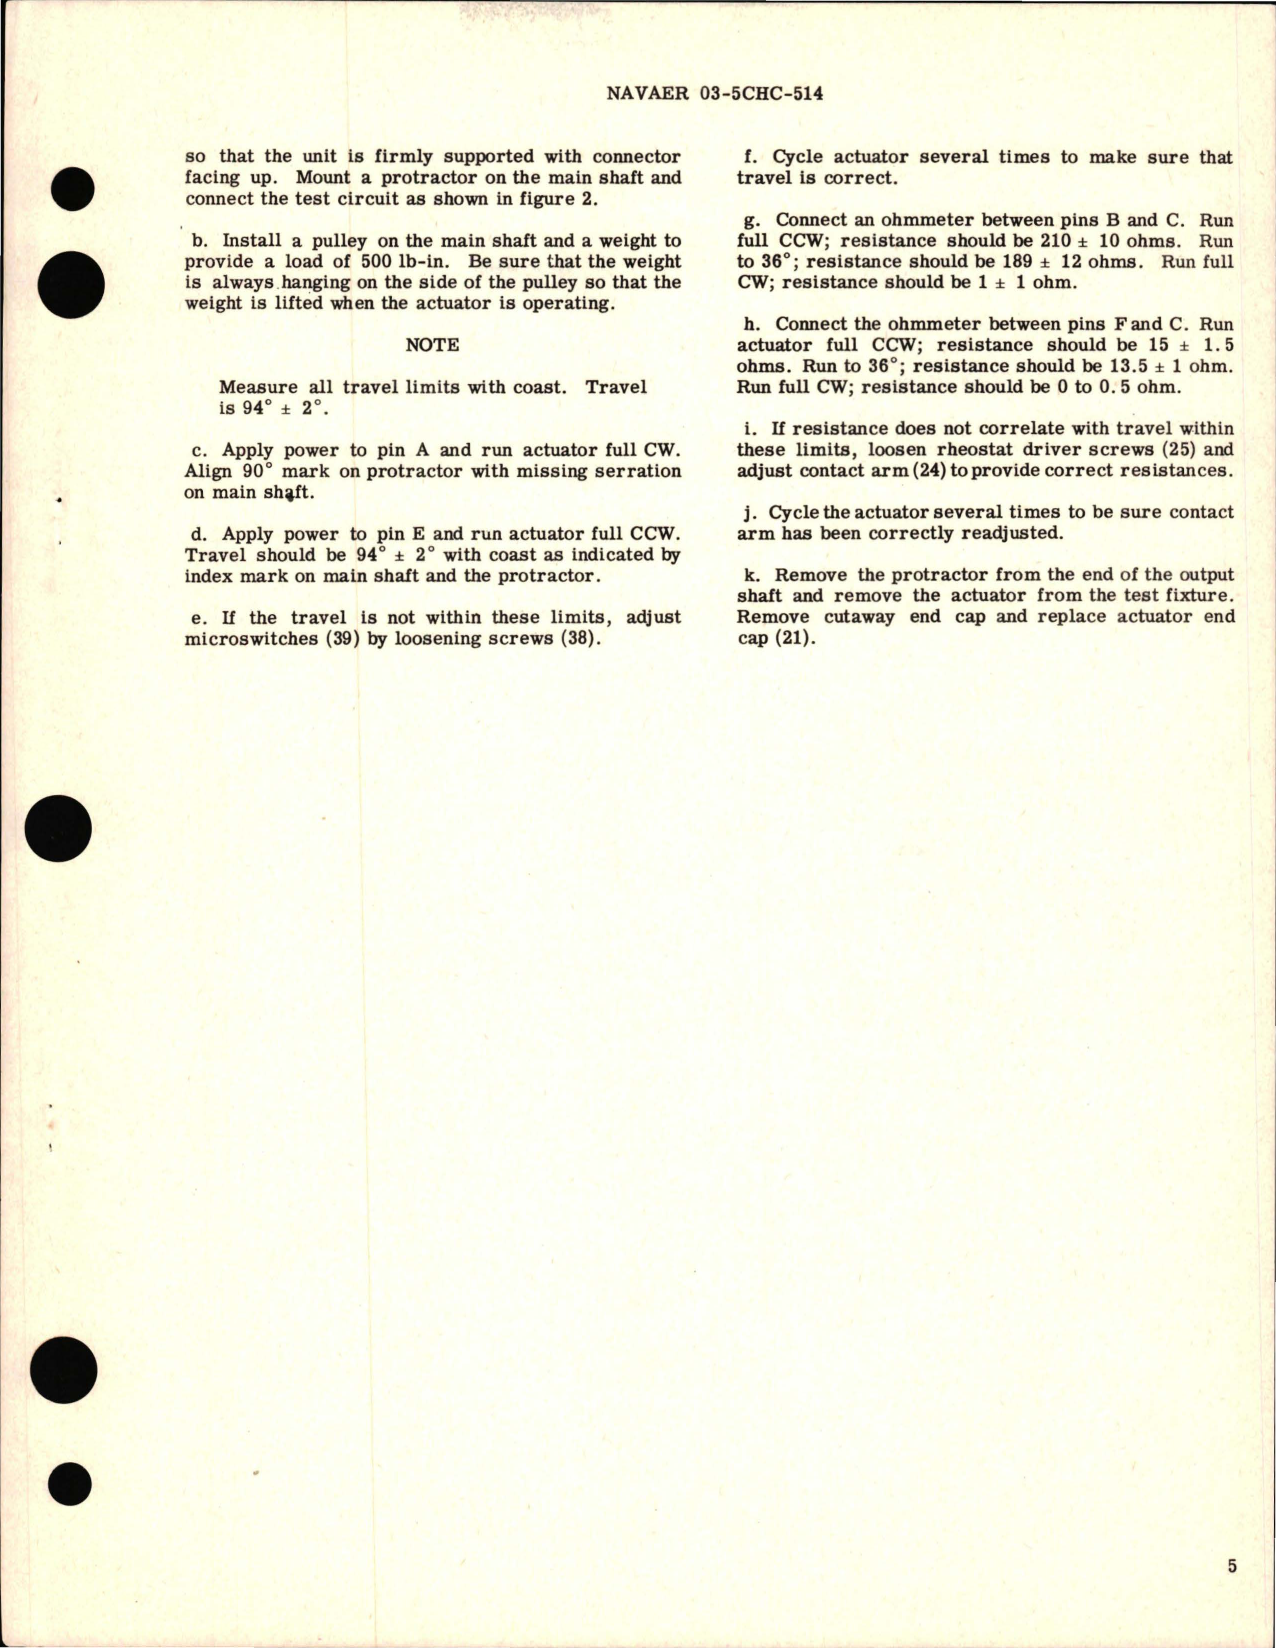 Sample page 5 from AirCorps Library document: Overhaul Instructions with Parts Breakdown for Aircraft Control Motor - BYLC 2870-1